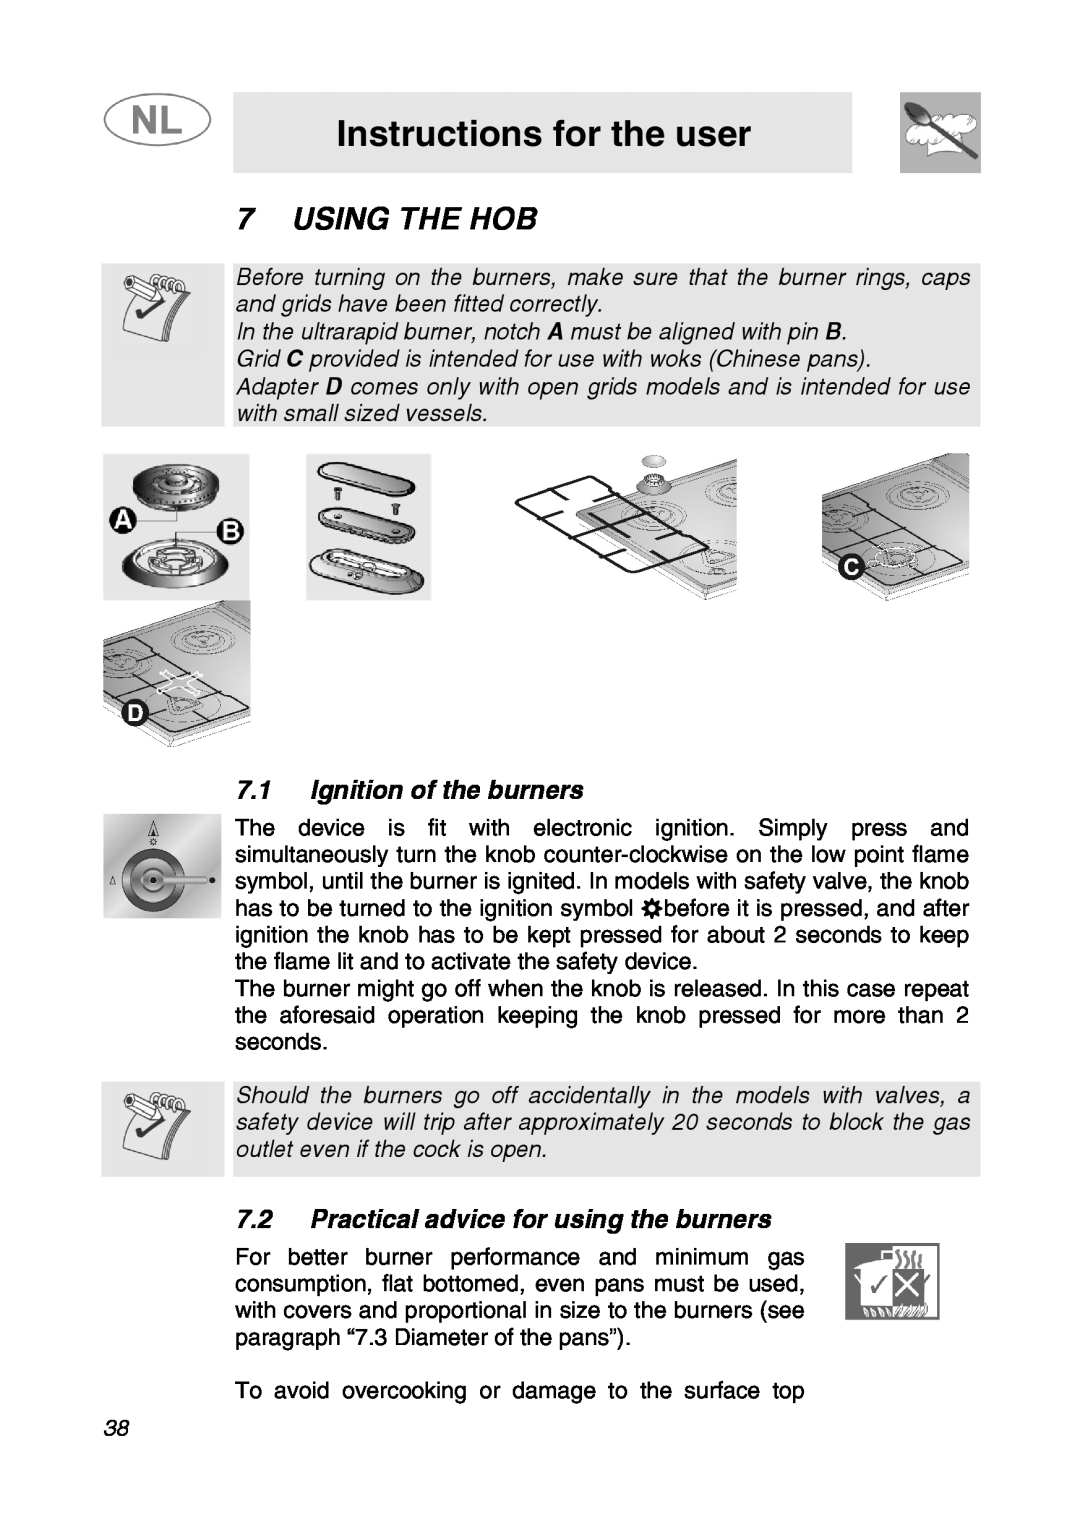 Smeg GKC95-3 Instructions for the user, Using The Hob, Ignition of the burners, Practical advice for using the burners 